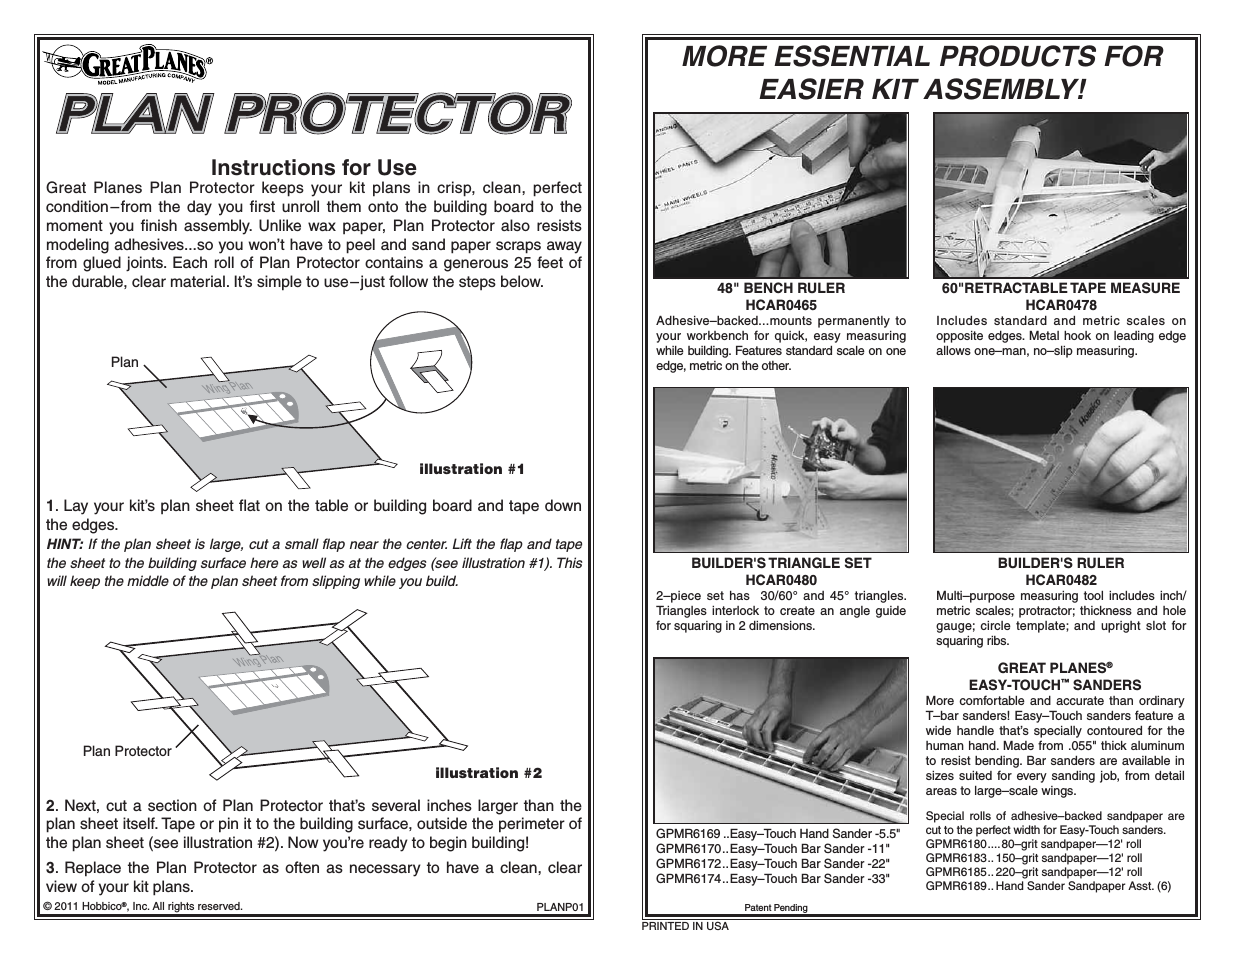 Plan Protector - GPMR6167